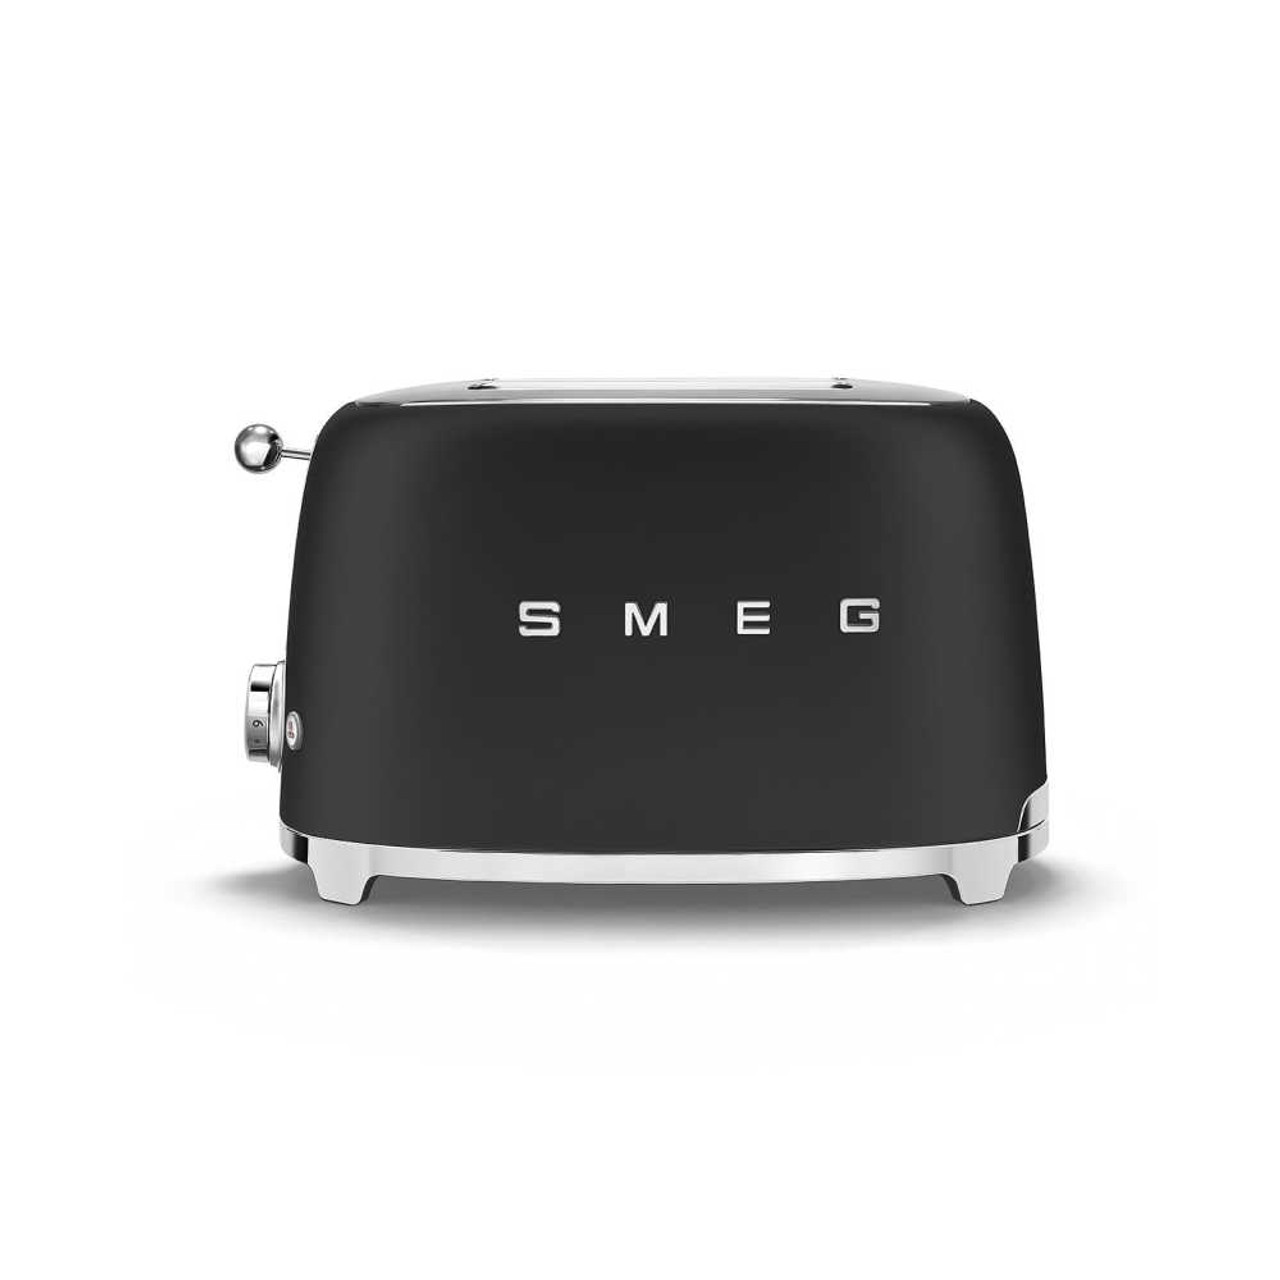 https://cdn11.bigcommerce.com/s-hccytny0od/images/stencil/1280x1280/products/1219/20264/SMEG_2-Slice_Toaster_in_Matte_Black__41334.1657202674.jpg?c=2?imbypass=on